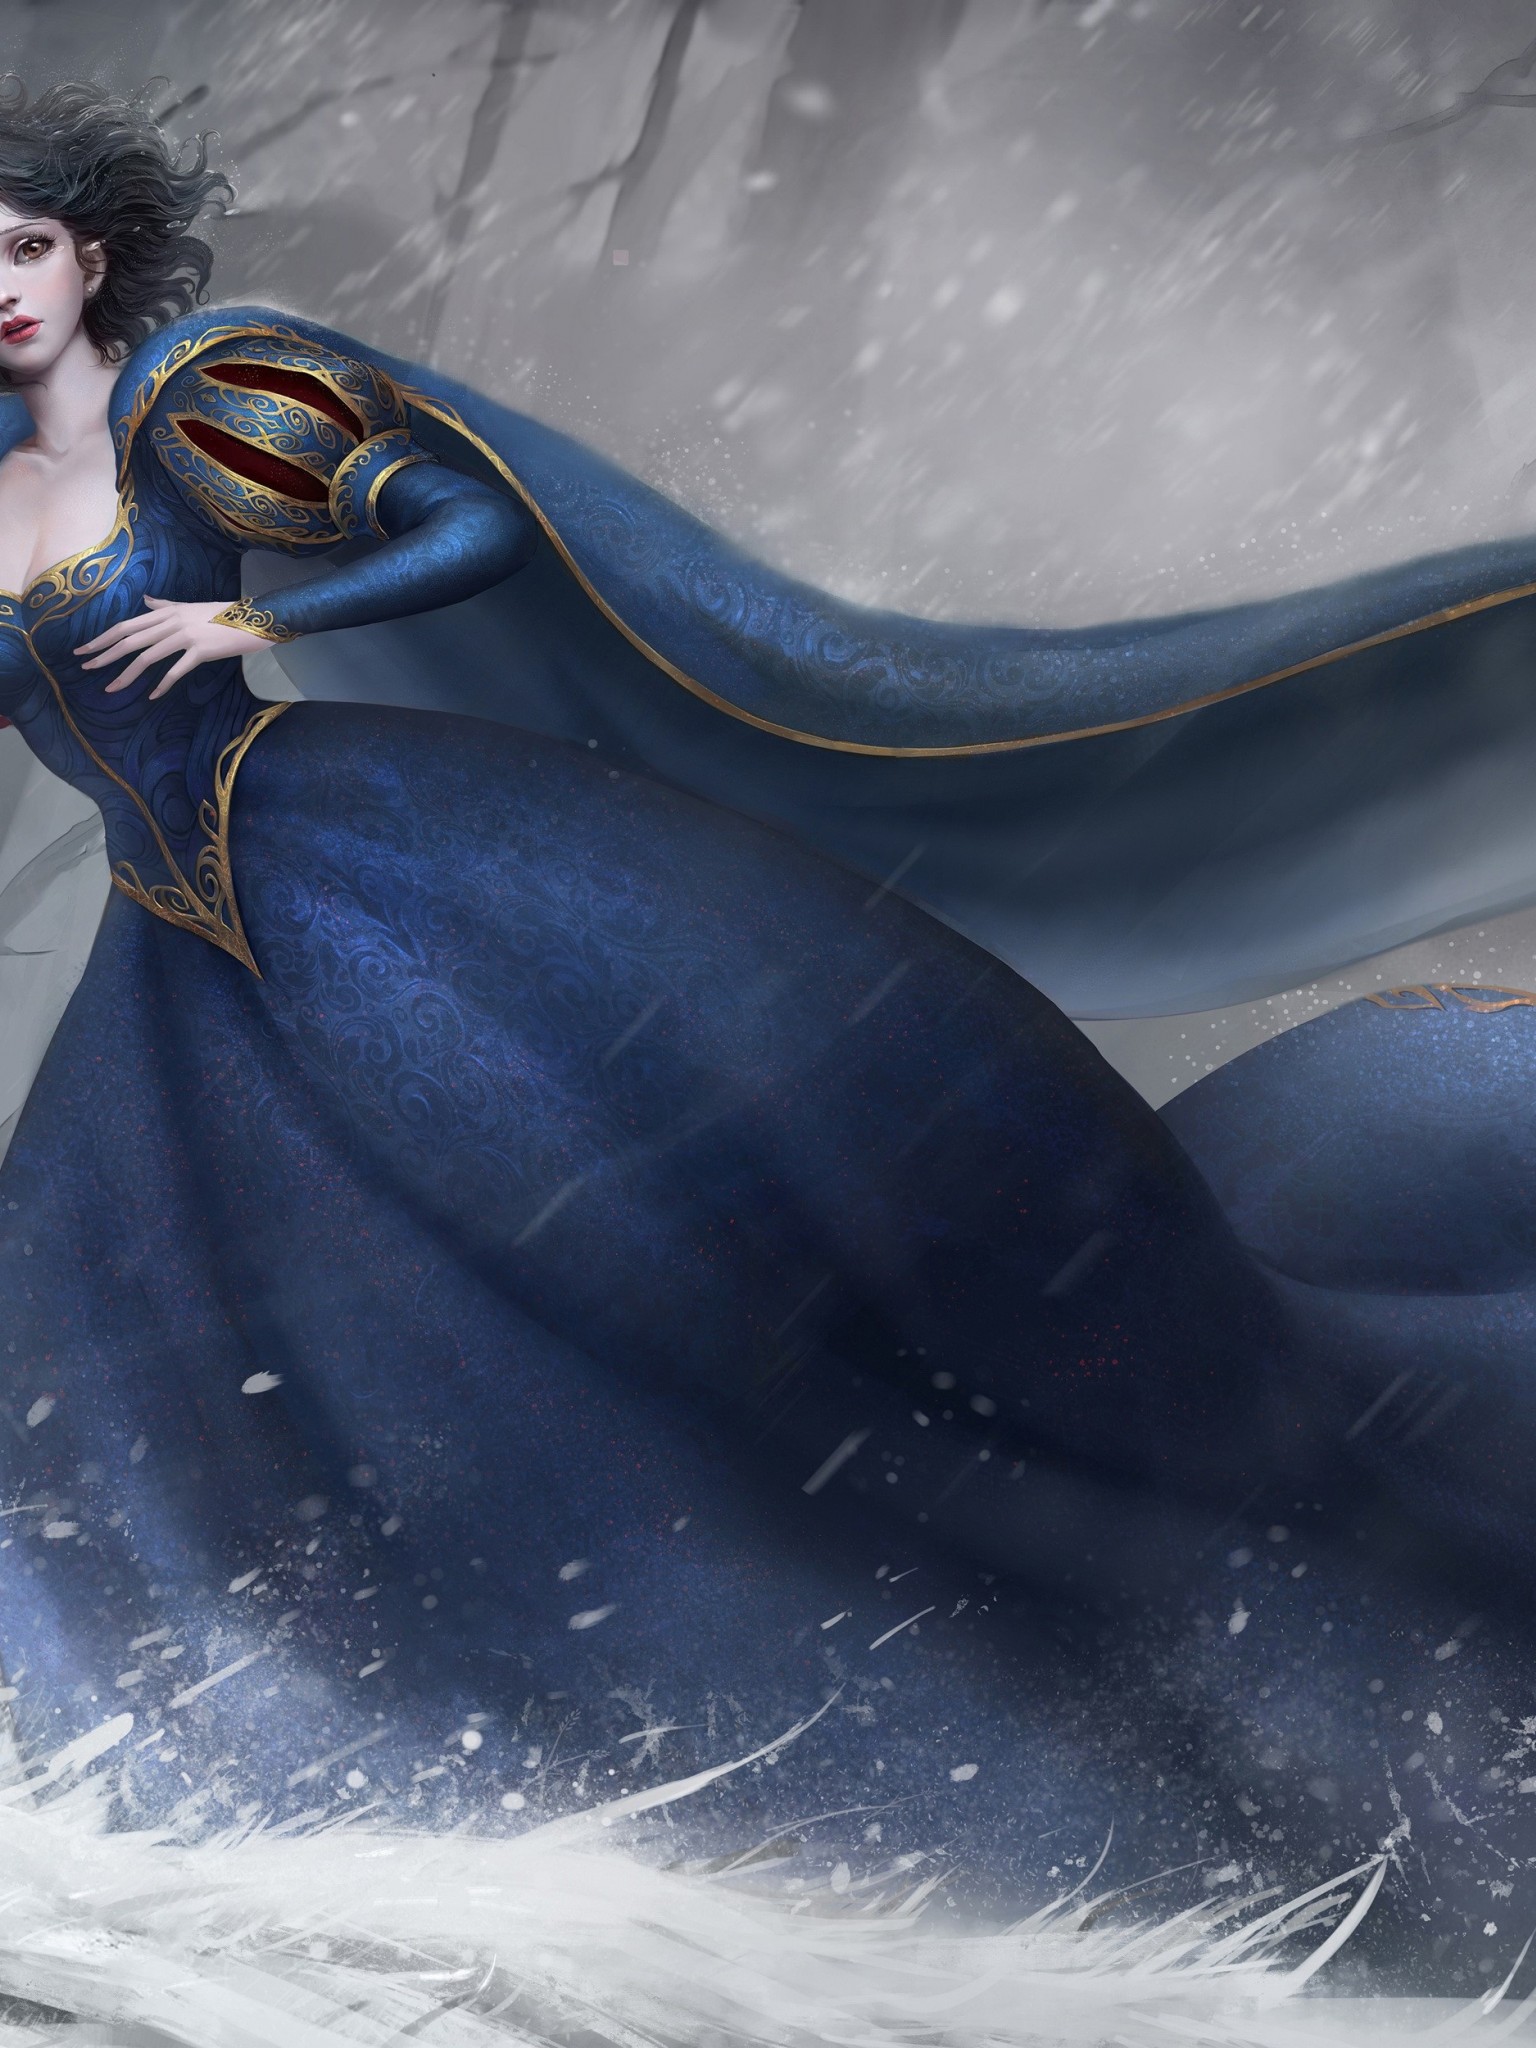 Download Snow White Wallpaper for Desktop and Mobiles